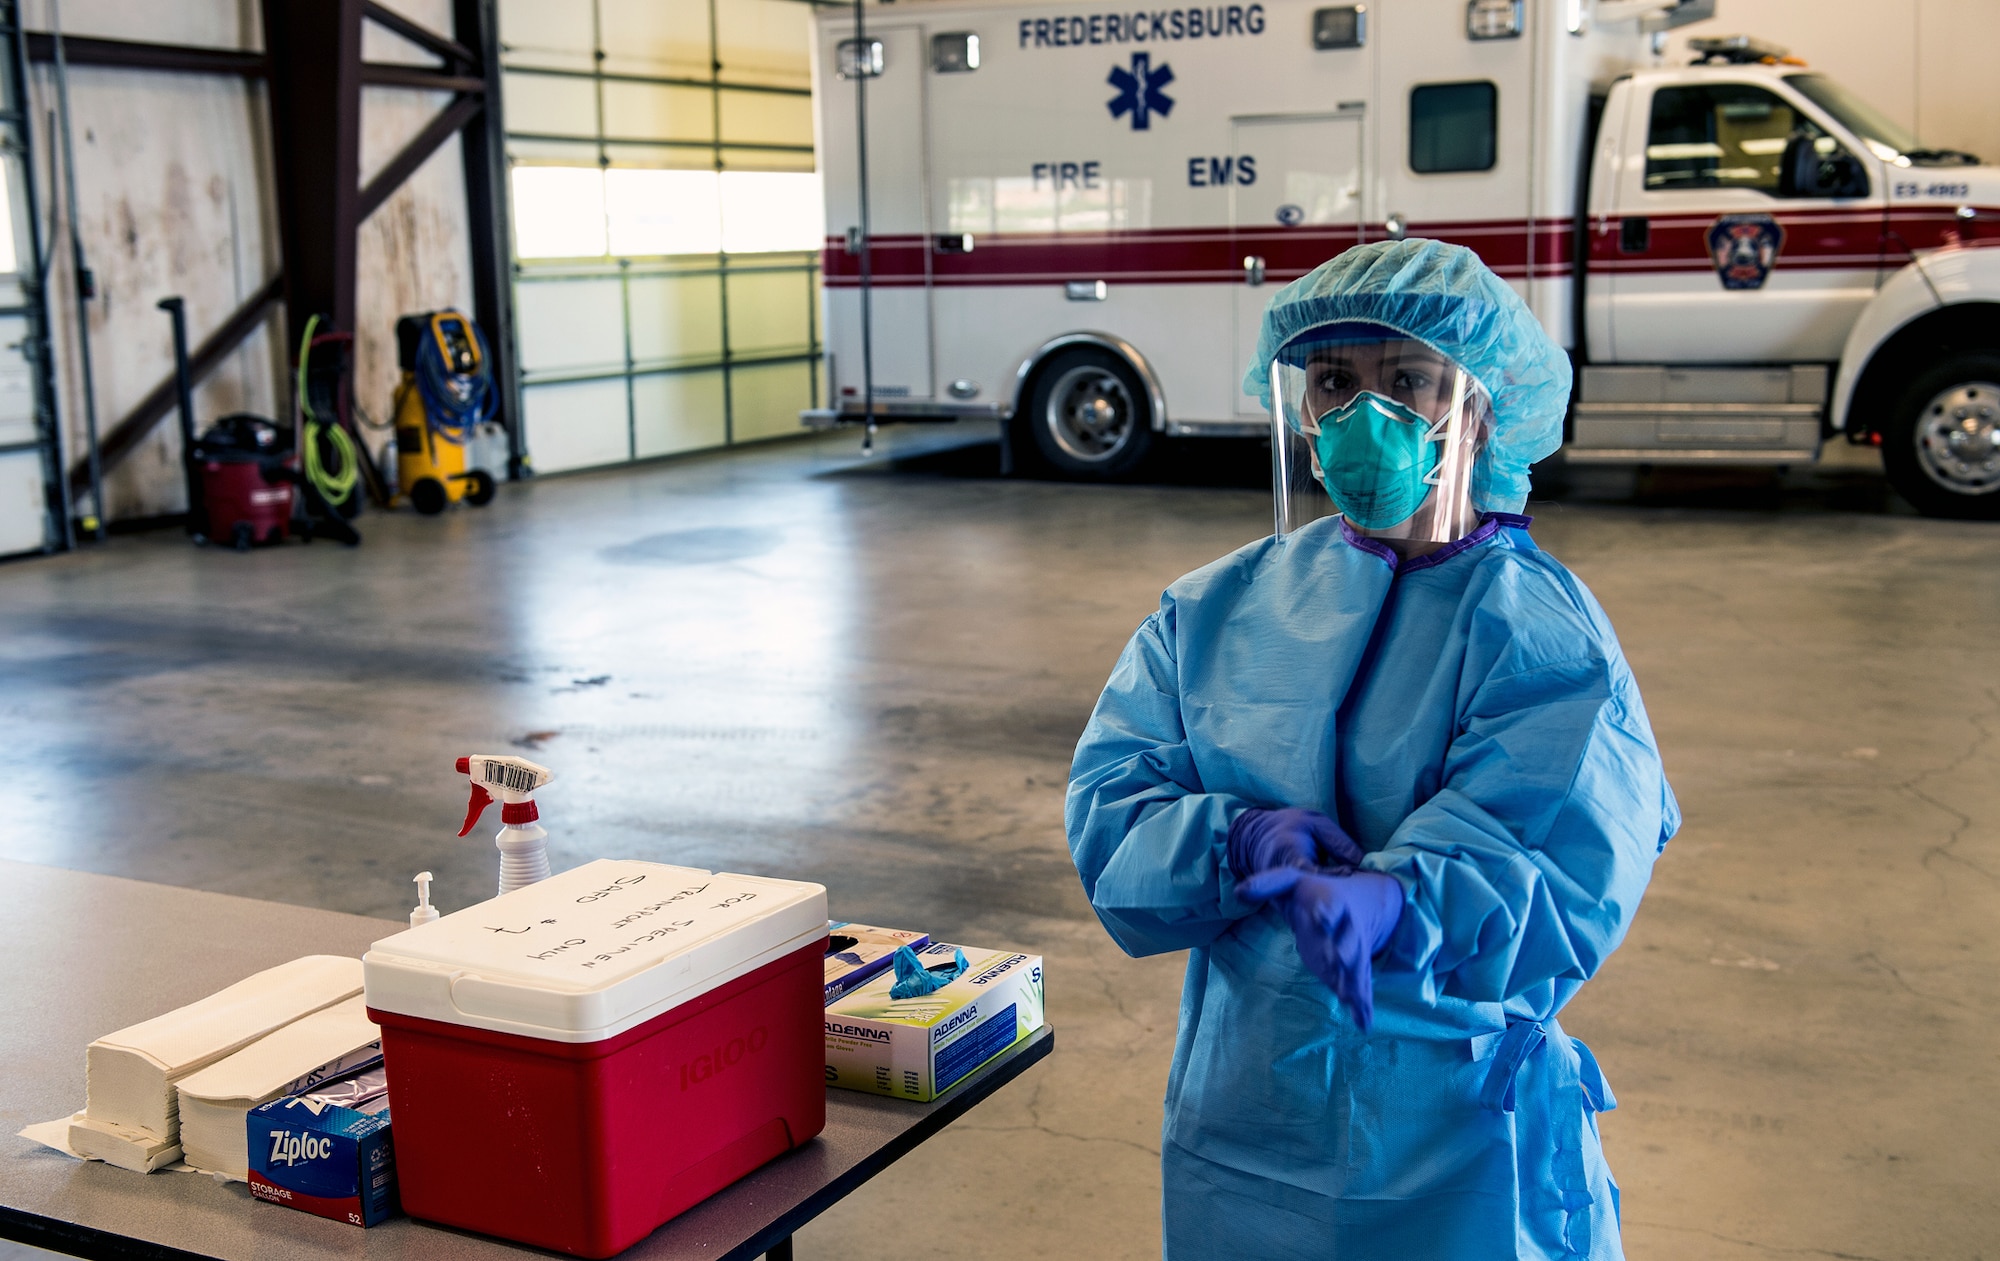 A Texas Air National Guard medic, attached to the 149th Fighter Wing, prepares to receive patients by properly securing her personal protective equipment at a community-based testing facility in Fredericksburg, Texas, April 19, 2020. The Texas Military Department, in tandem with state partners, has established community-based testing facilities to provide drive-in COVID-19 screenings to communities not served by a county health department. These facilities will allow Texas to curb the spread of COVID-19. (U.S. Army National Guard photo by Charles E. Spirtos)